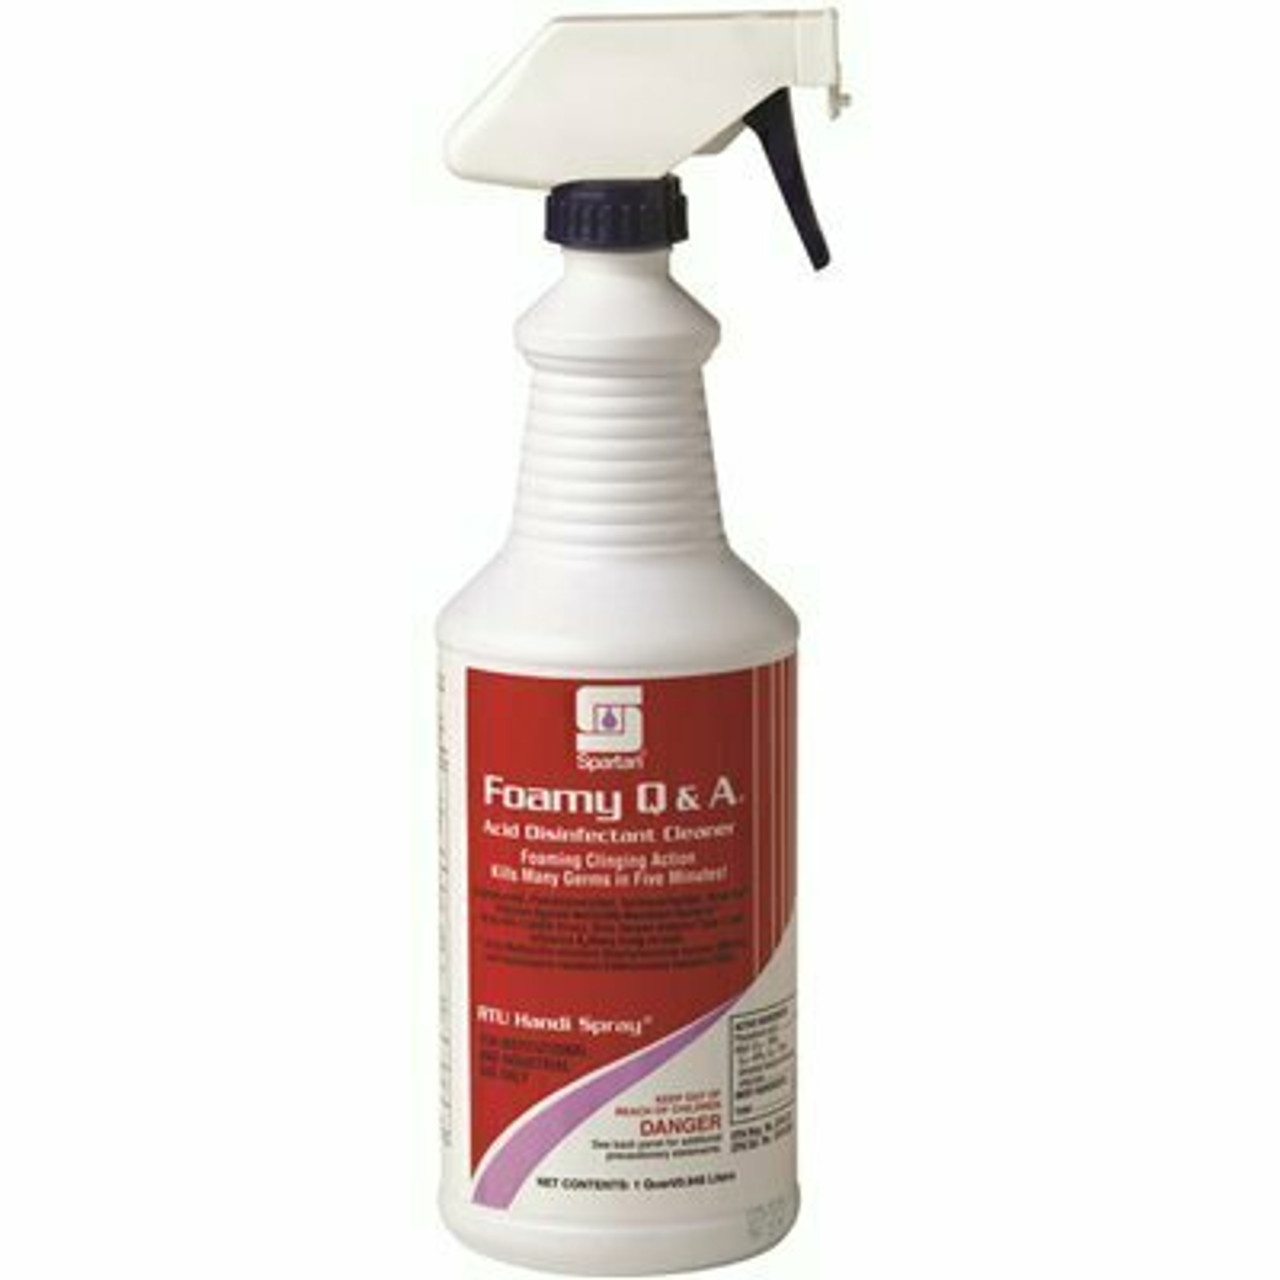 Spartan Ford Tox Foamy Q And A 1 Qt. Citrus Scent One Step Restroom Tile And Grout Cleaner/Disinfectant (12-Pack)